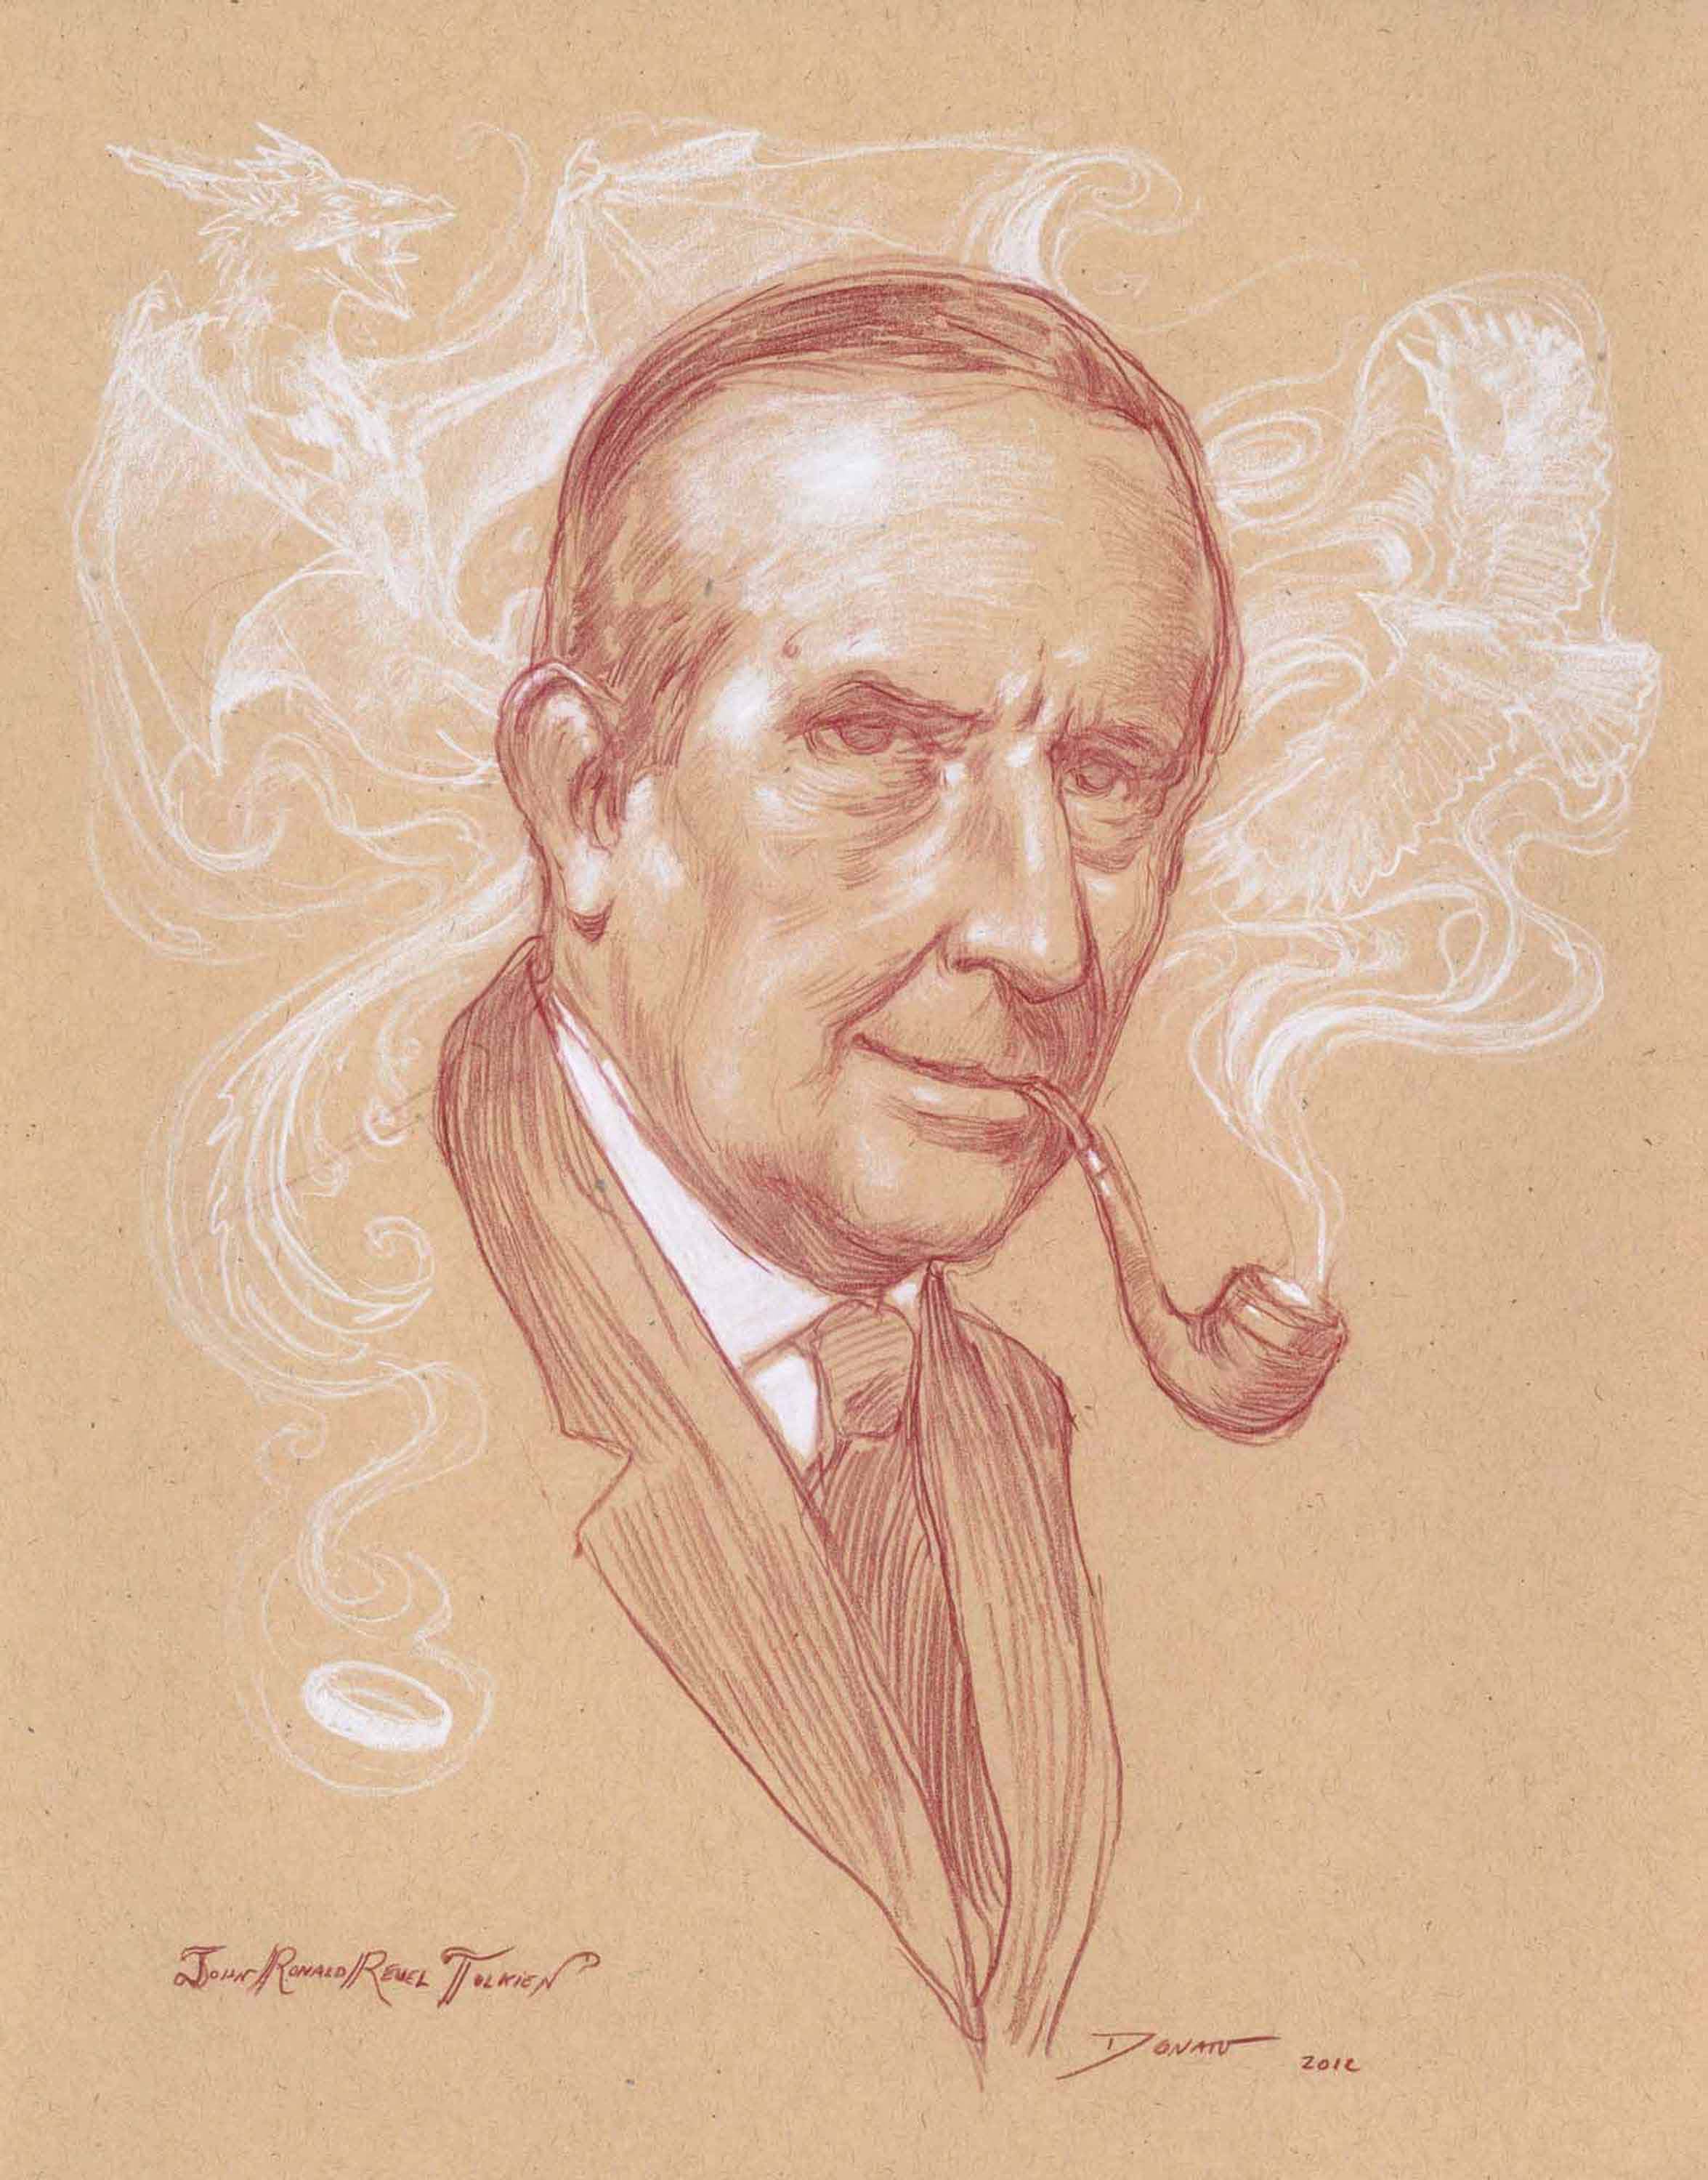 J.R.R. Tolkien
14" x 11"  Watercolor Pencil and Chalk on Toned paper 2012
private collection